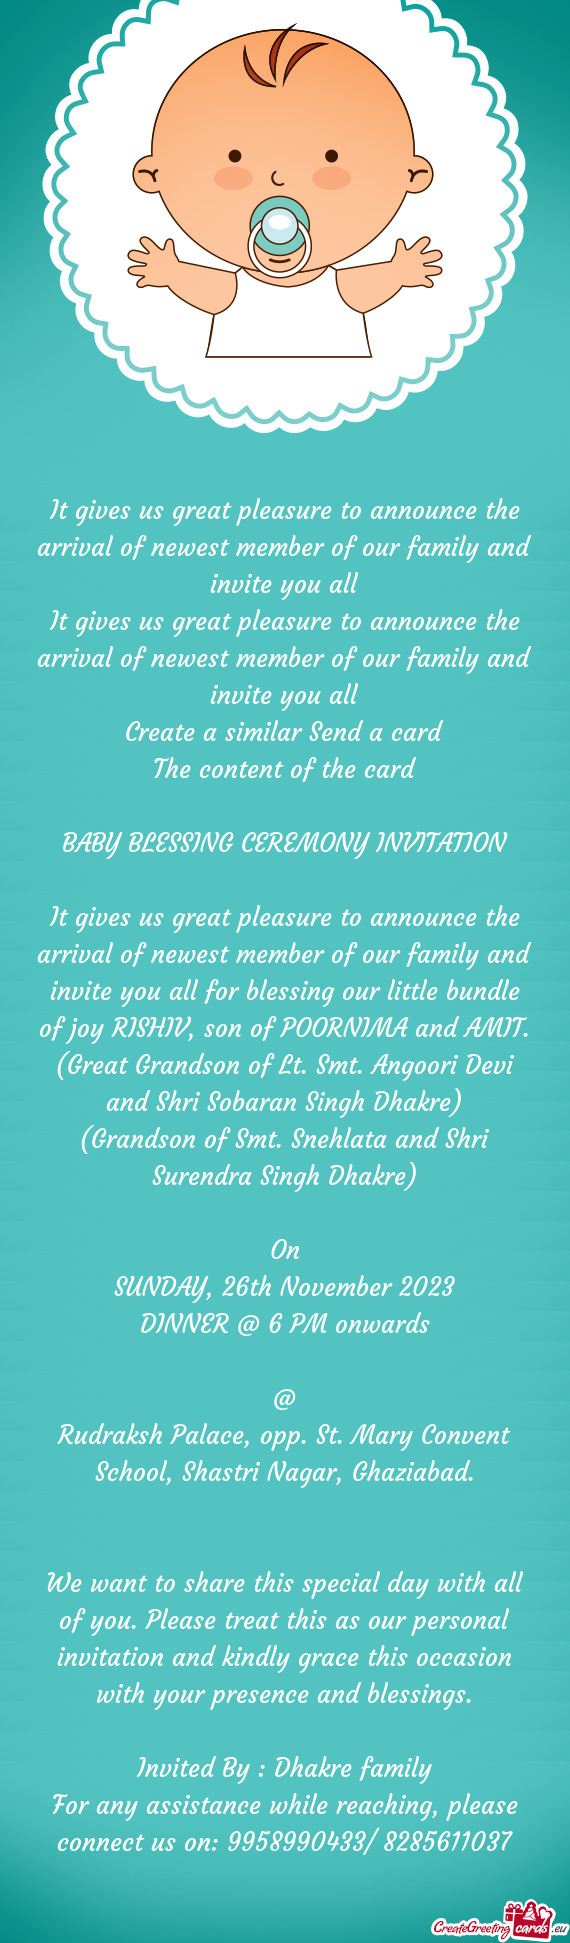 For blessing our little bundle of joy RISHIV, son of POORNIMA and AMIT